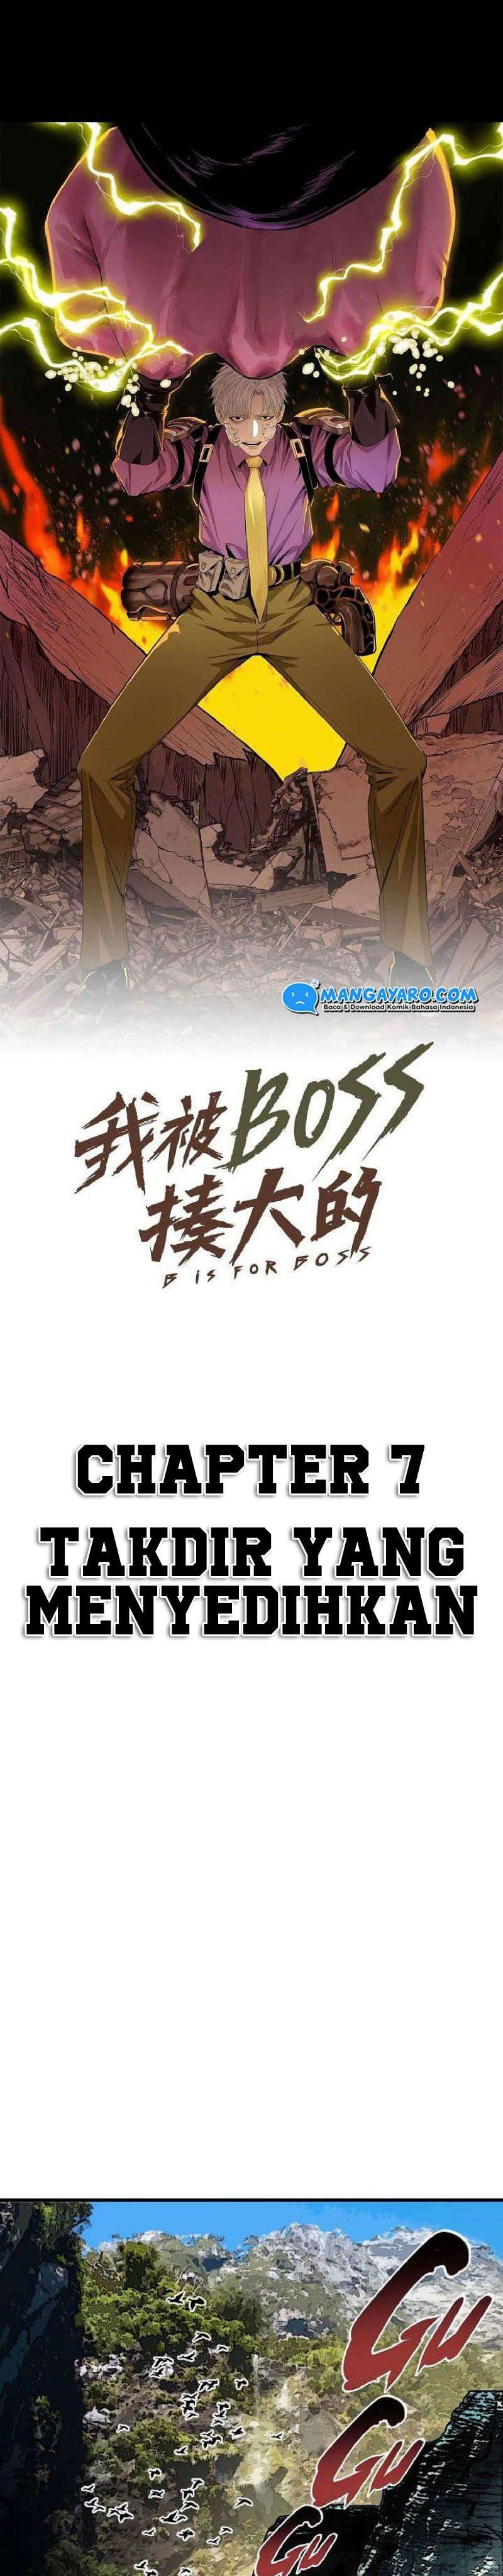 I Was Raised By The Boss Chapter 7